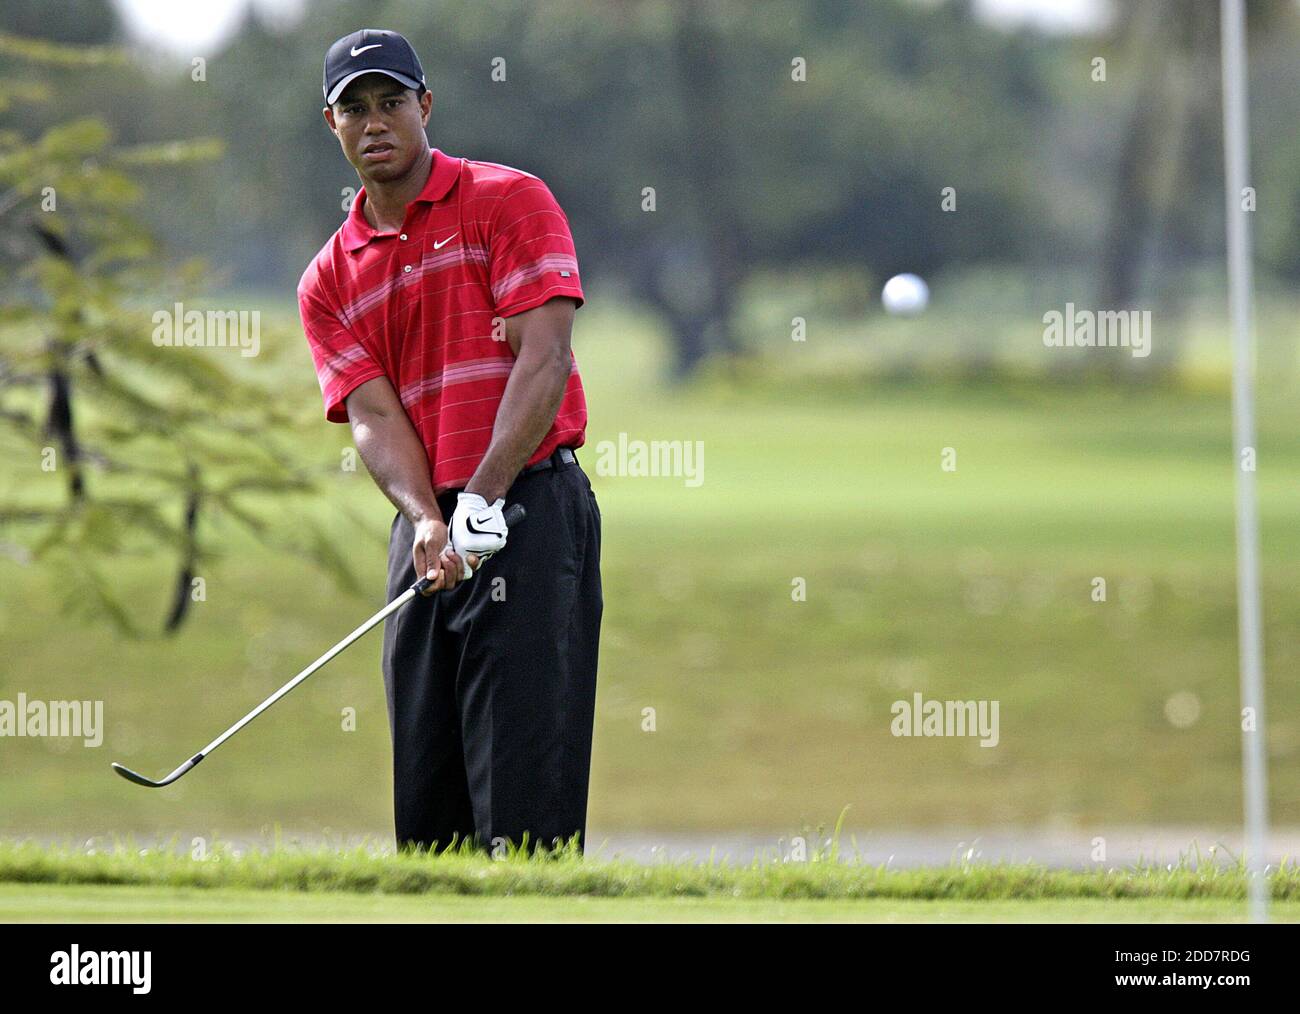 NO FILM, NO VIDEO, NO TV, NO DOCUMENTARY - Tiger Woods chips onto the 16th green during the continuation of the third round of the 2008 World Golf Championship-CA at the Doral Golf Resort & Spa in Miami, FL, USA on March 23, 2008.Photo by John VanBeekum/Miami Herald/MCT/Cameleon/ABACAPRESS.COM Stock Photo